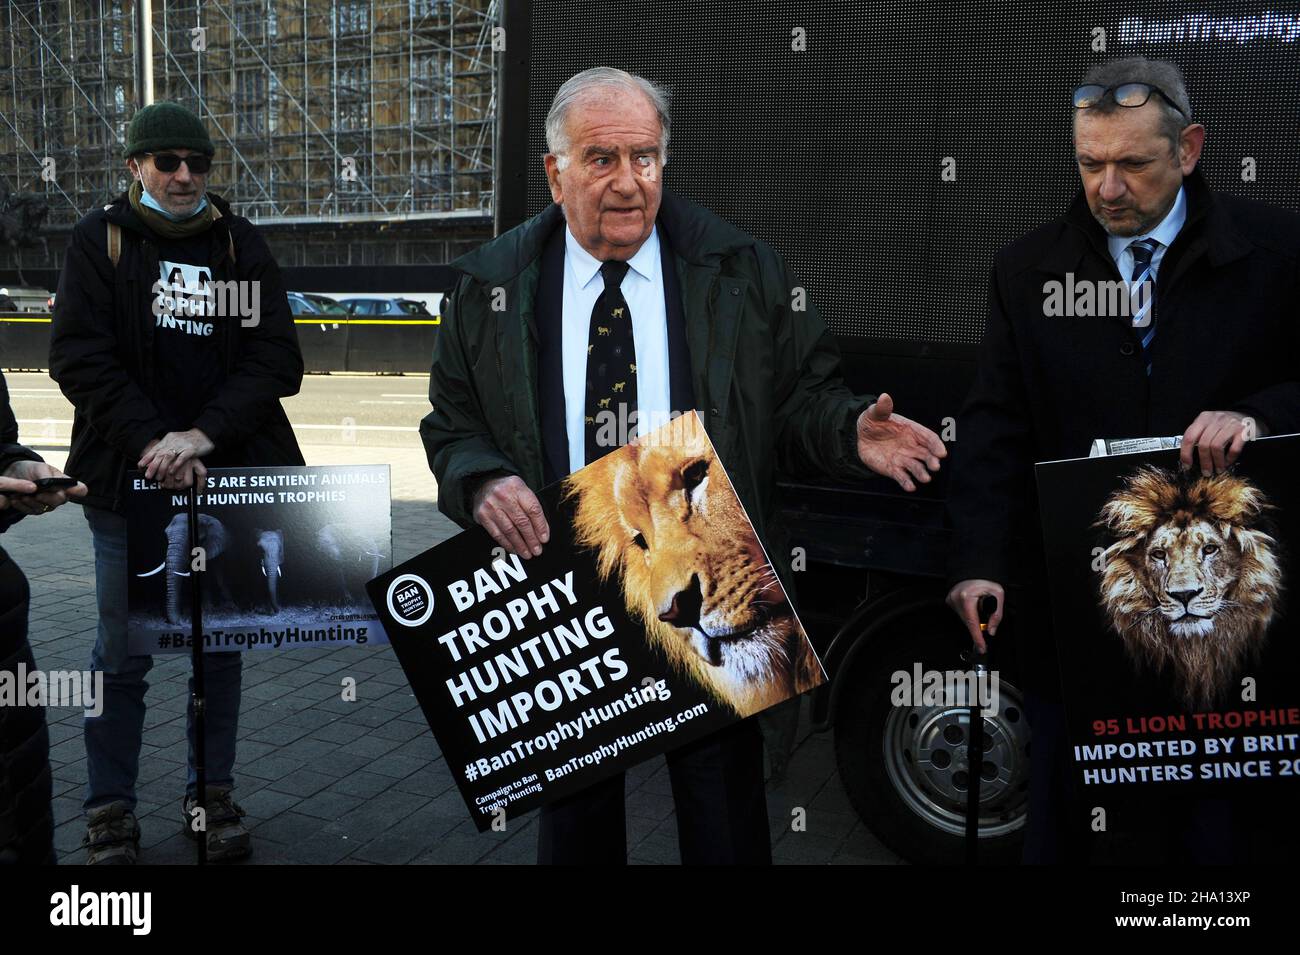 London, UK. 9th Dec, 2021. Campaign to Ban Trophy Hunting, a new all party parliamentary group newly launched display their new digital banner outside the Houses of Parliament which shows animal trophy heads on a luggage carousel. Credit: JOHNNY ARMSTEAD/Alamy Live News Stock Photo